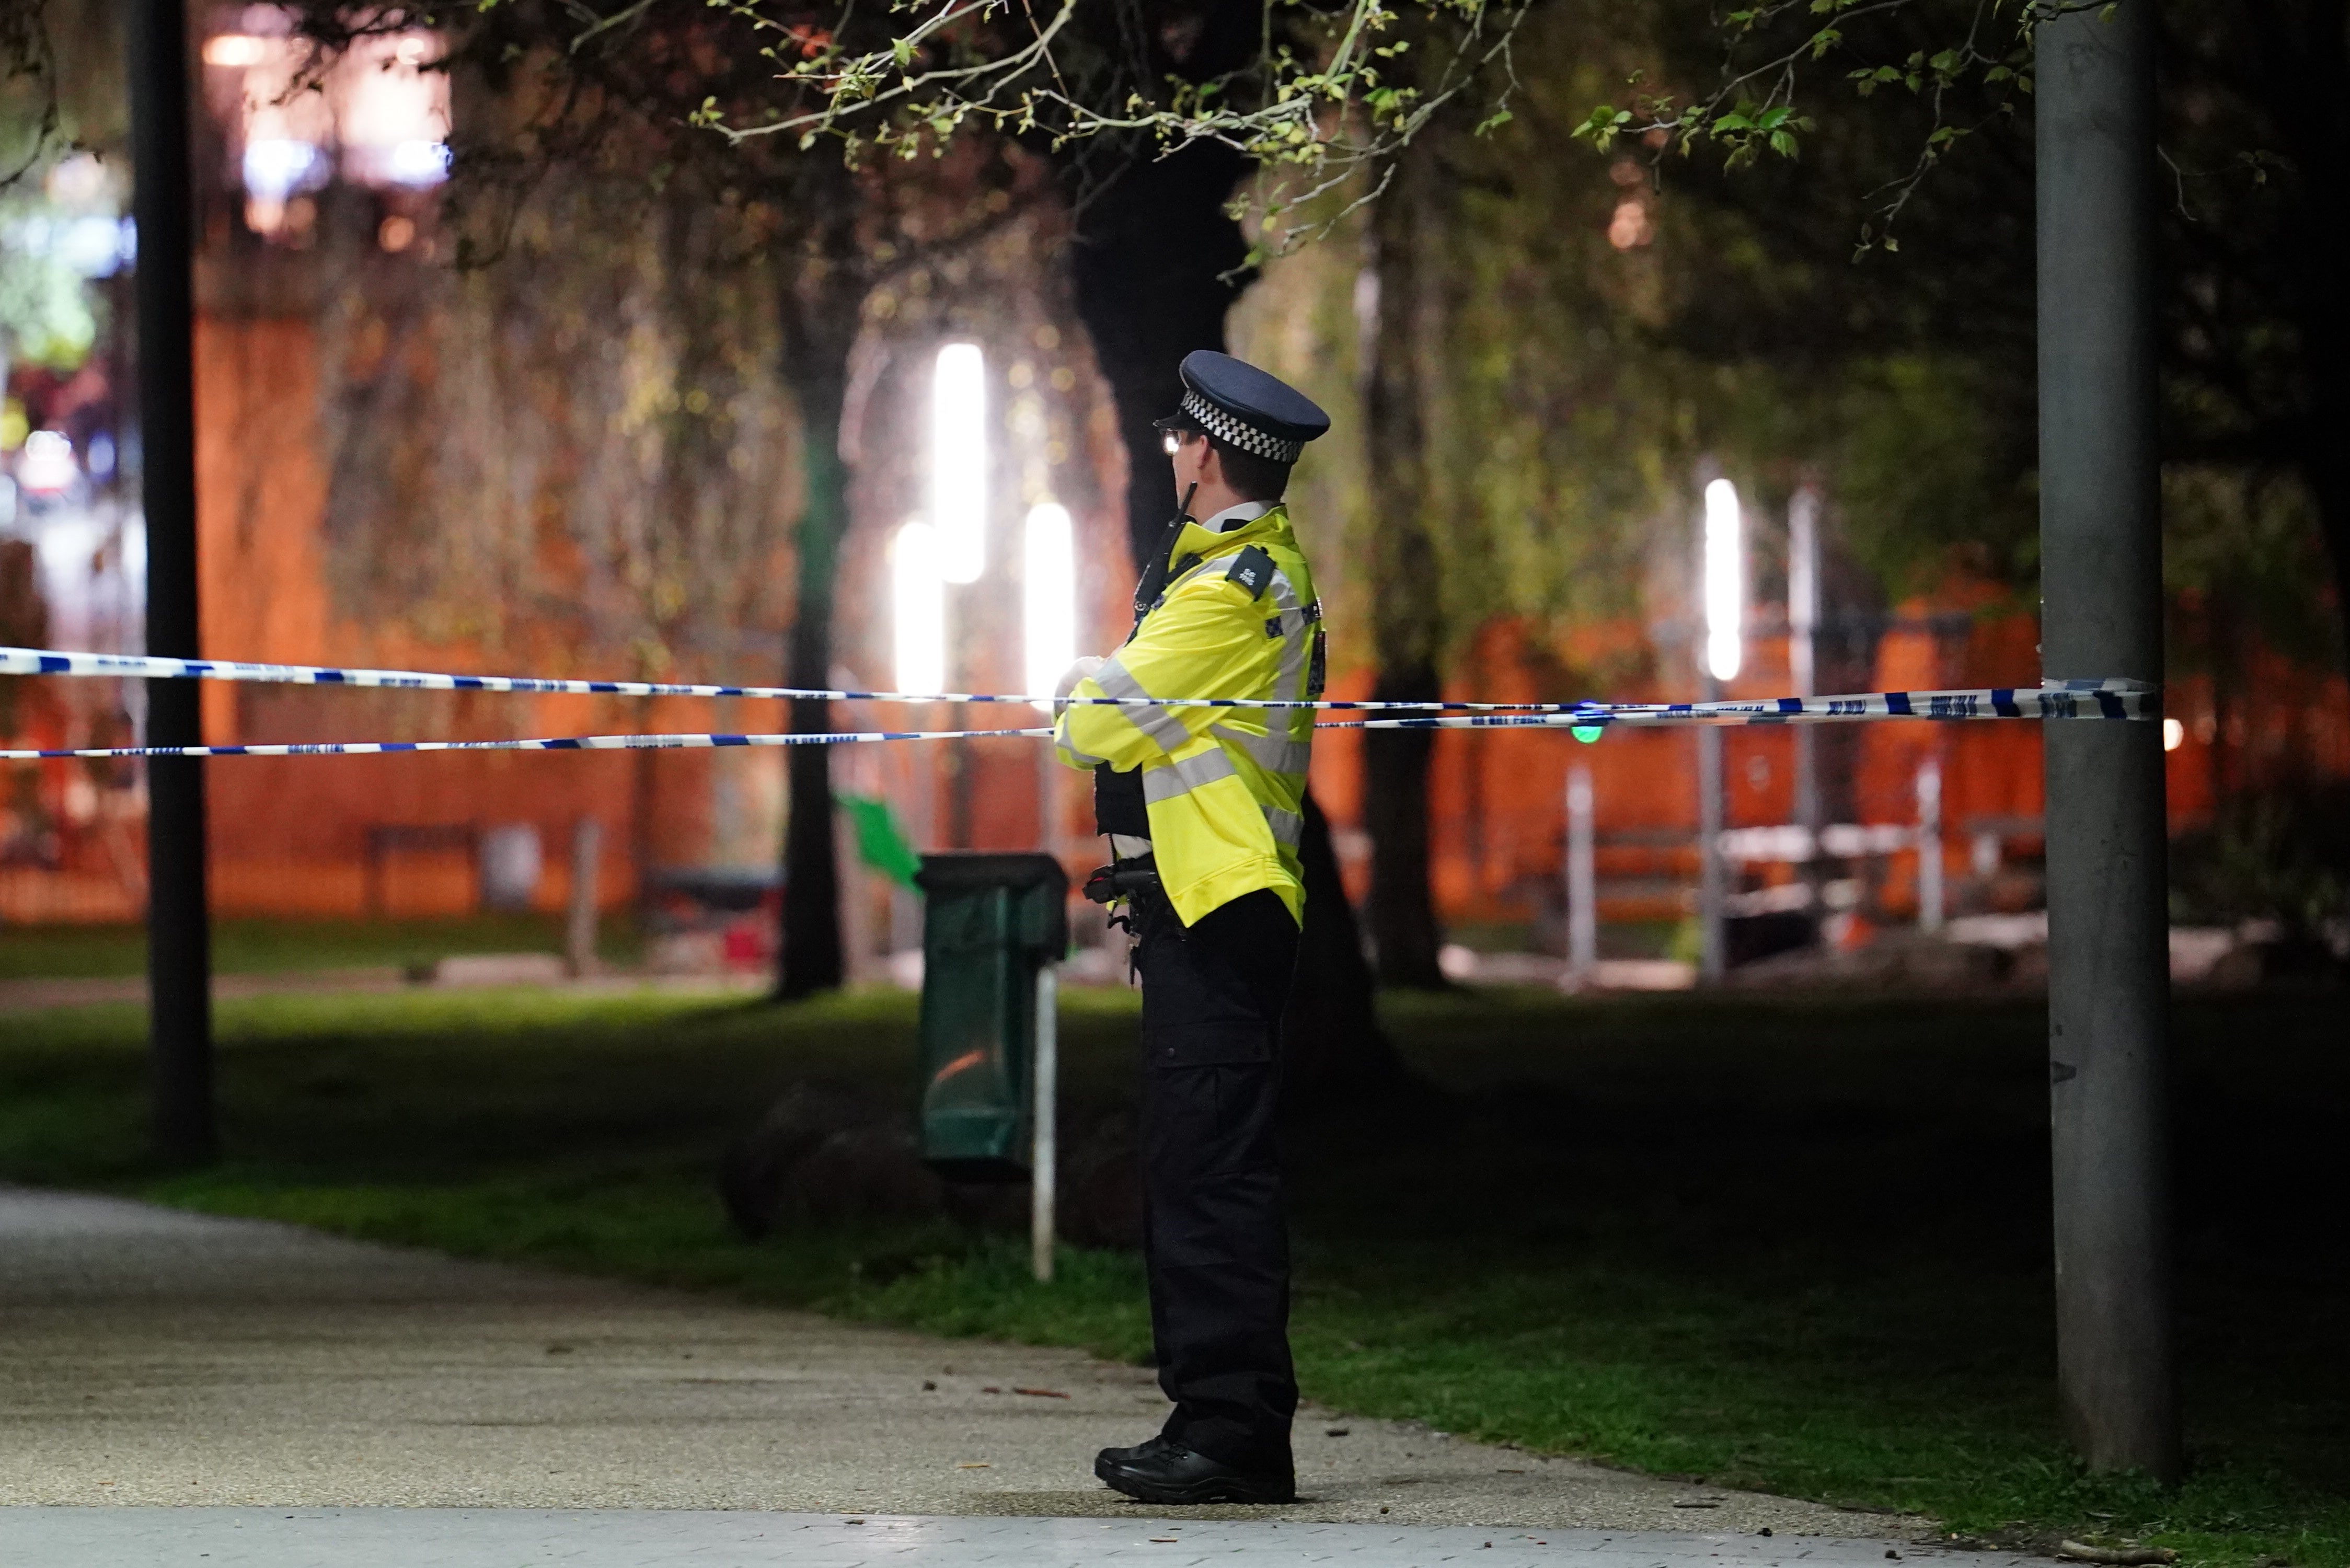 Police at the scene in Lewisham after a 16-year-old boy died in a stabbing (Dominic Lipinski/PA)